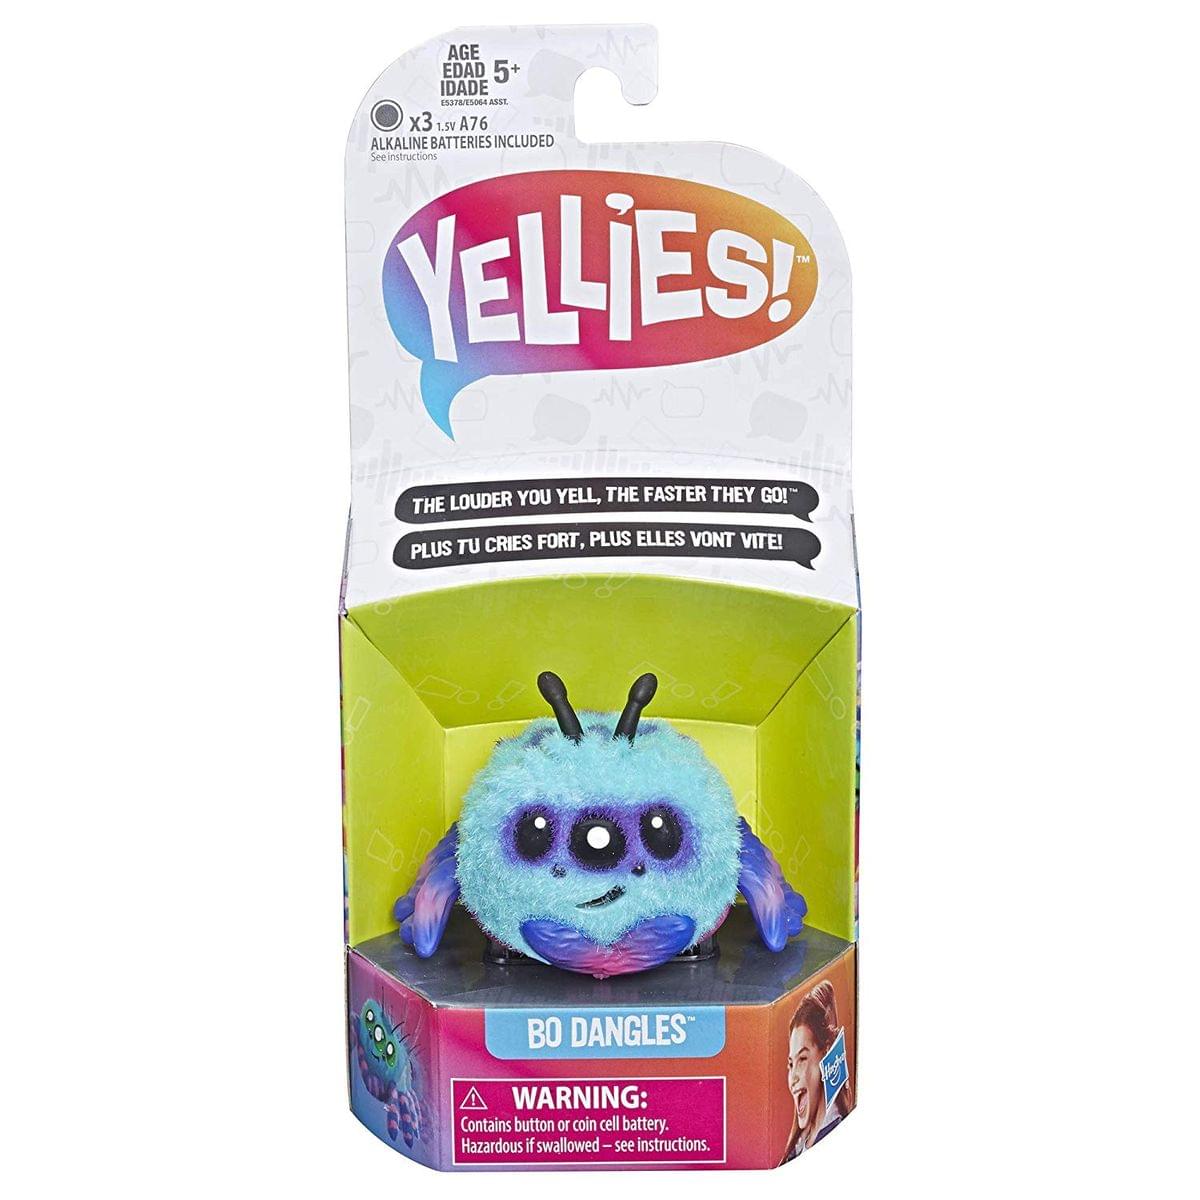 Yellies! Voice-Activated Spider Pet - Bo Dangles